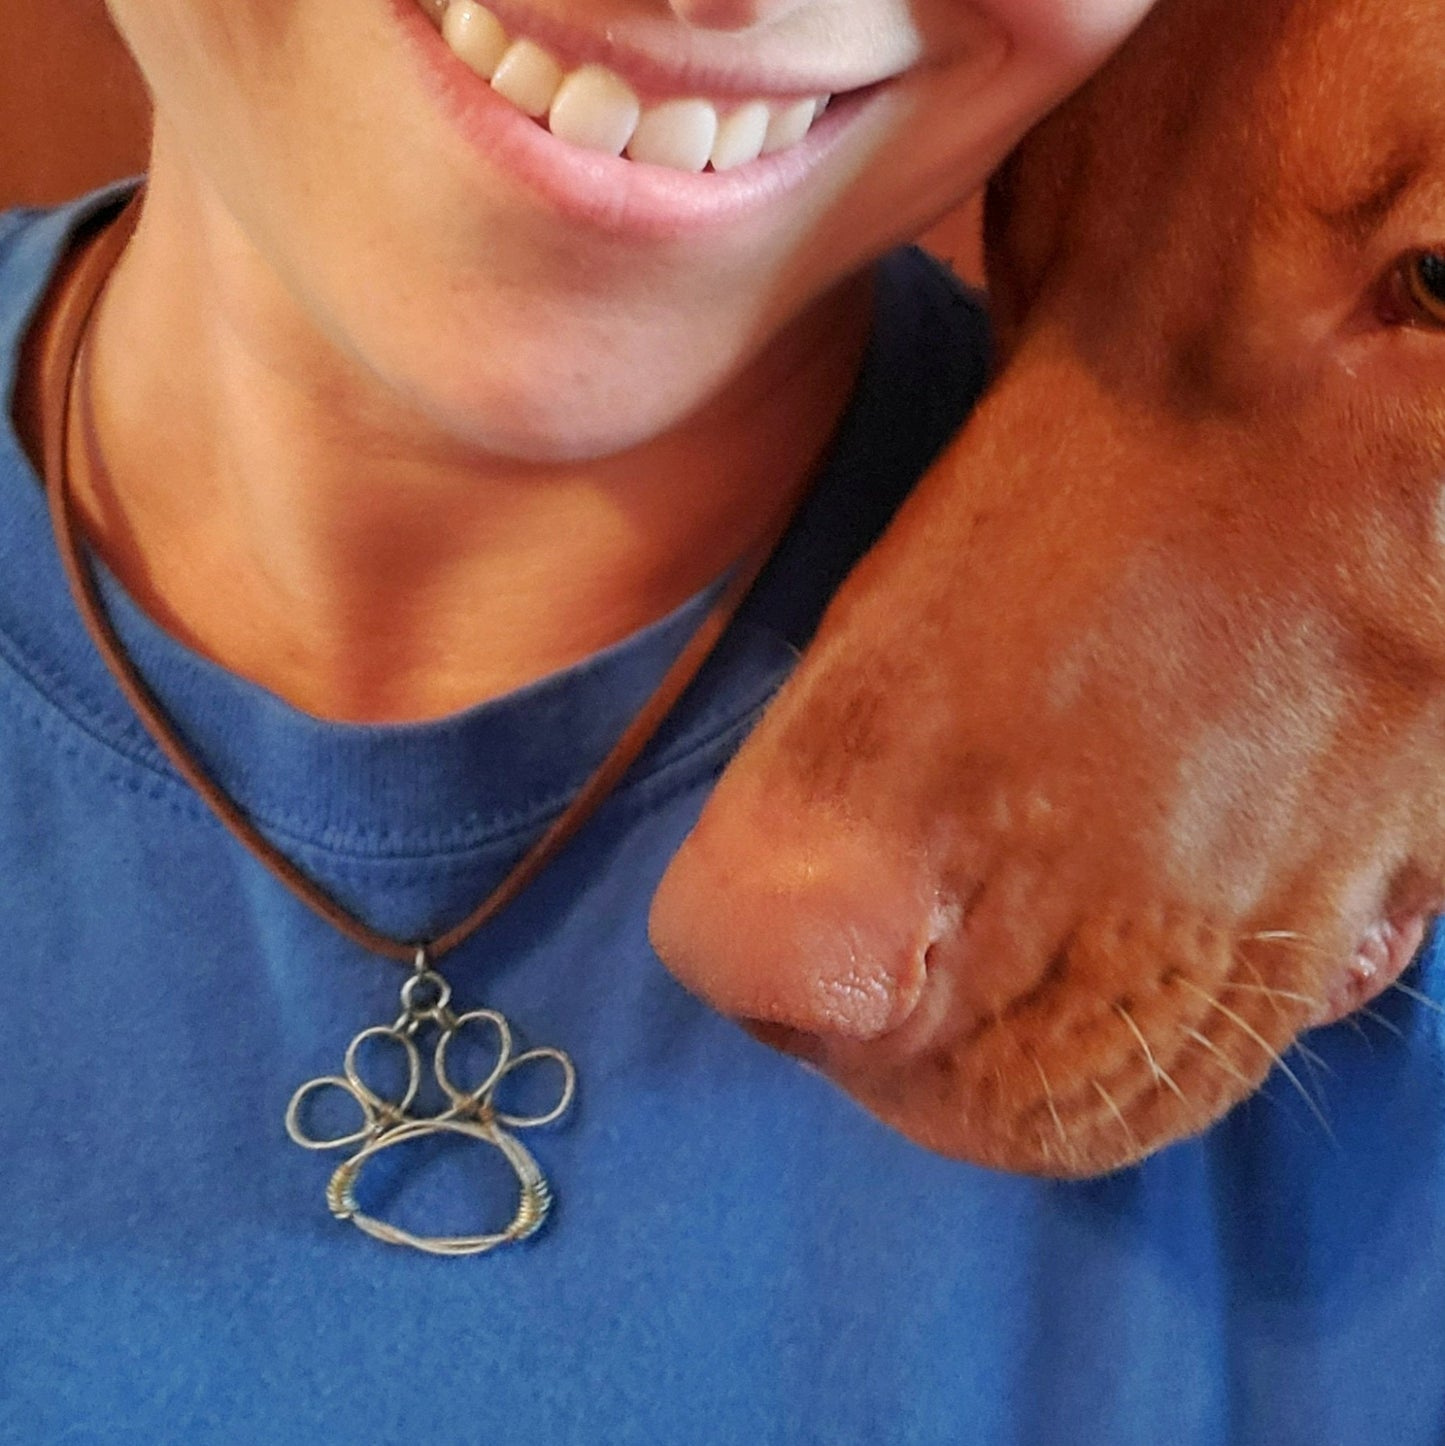 bottom of a woman's face wearing blue t-shirt and a necklace - necklace has a paw print pendant made from an upcycled guitar string - nose of a vizsla